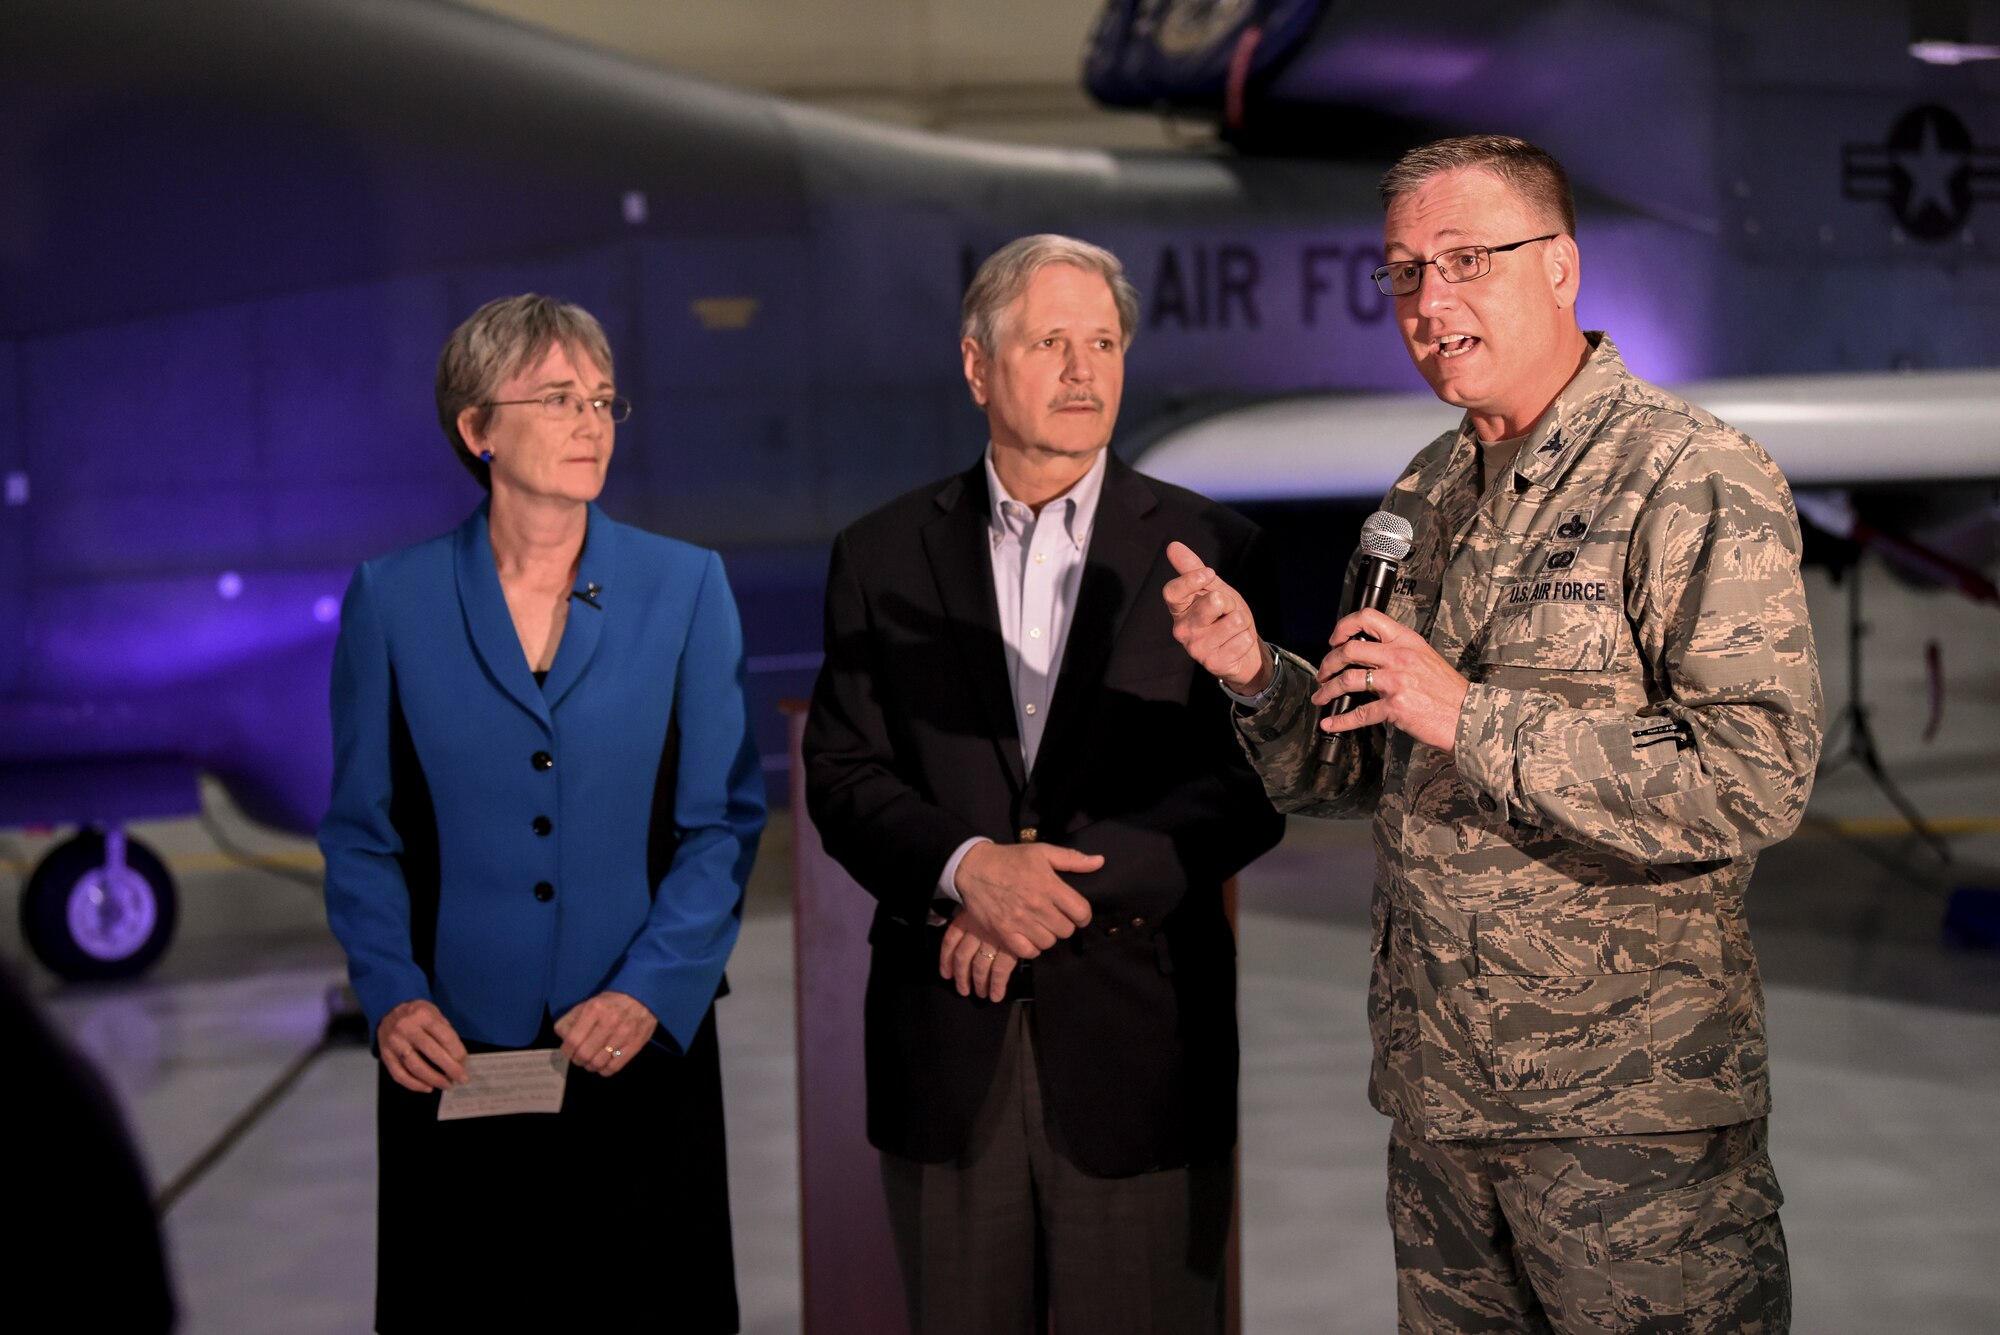 Colonel Benjamin Spencer, 319th Air Base Wing commander, answered questions alongside Heather Wilson, Secretary of the Air Force and John Hoeven, U.S. Senator of North Dakota about the future of the RQ-4 Global Hawk mission during the announcement of the upcoming re-designation to the 319th Reconnaissance Wing May 11, 2019 at Grand Forks Air Force Base, North Dakota. The official re-designation ceremony is scheduled for June 28, 2019, the effective date of re-designation. (U.S. Air Force photo by Staff Sergeant Michael Reeves Jr.)